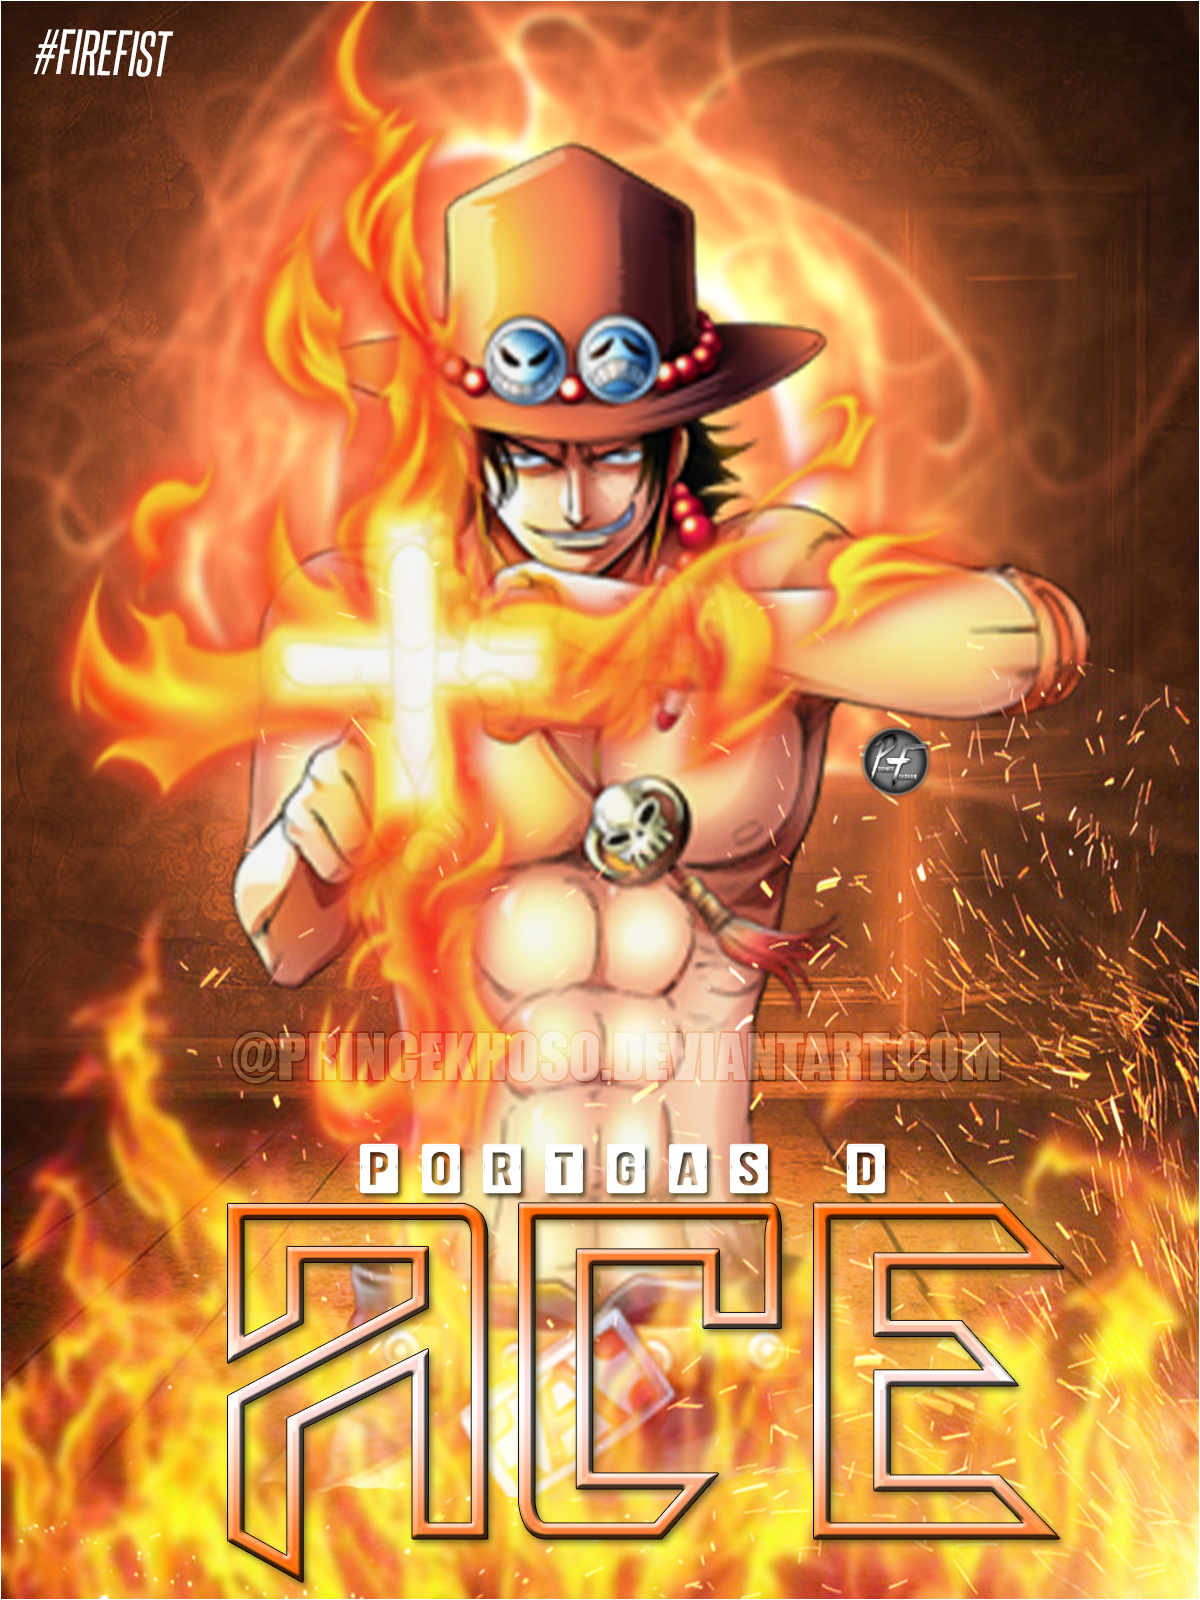 One Piece - Portgas-D Ace Wallpaper 2019 by Princekhoso on DeviantArt